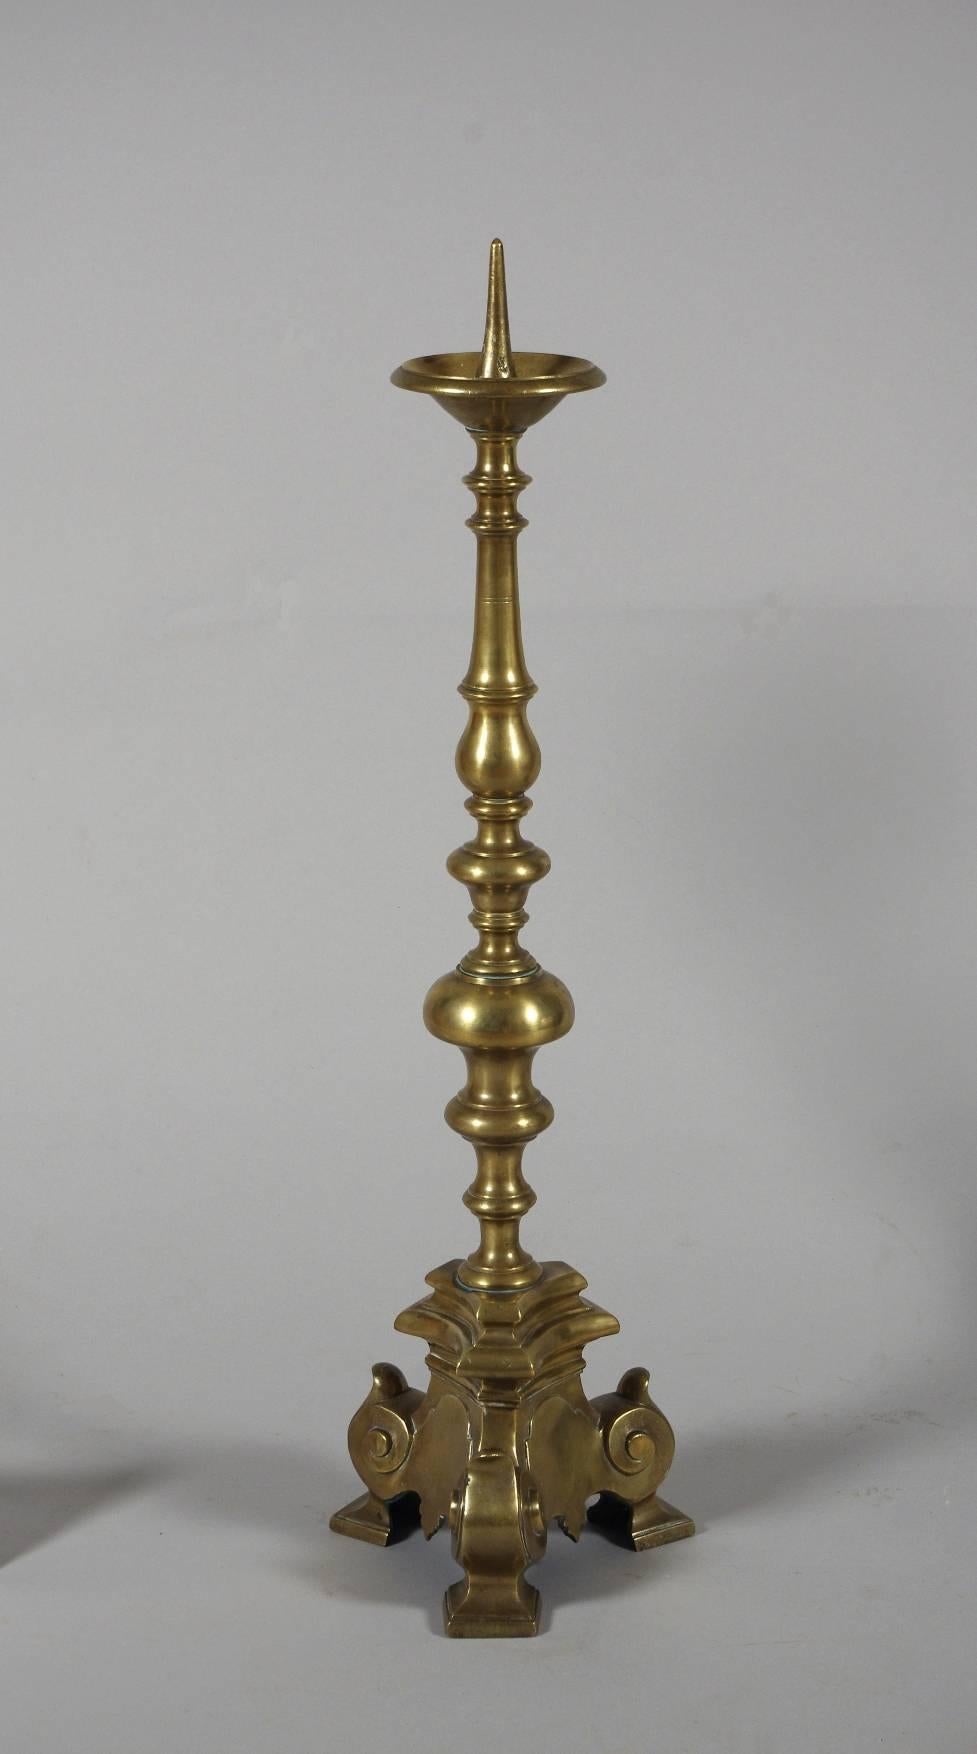 Rare set of four tall brass altar sticks, each with a brass pricket and deep bobeche; the turned stem raised on a triangular base with square feet.

These beautiful candlesticks date to the 18th century, but are in the 16th century style. For a